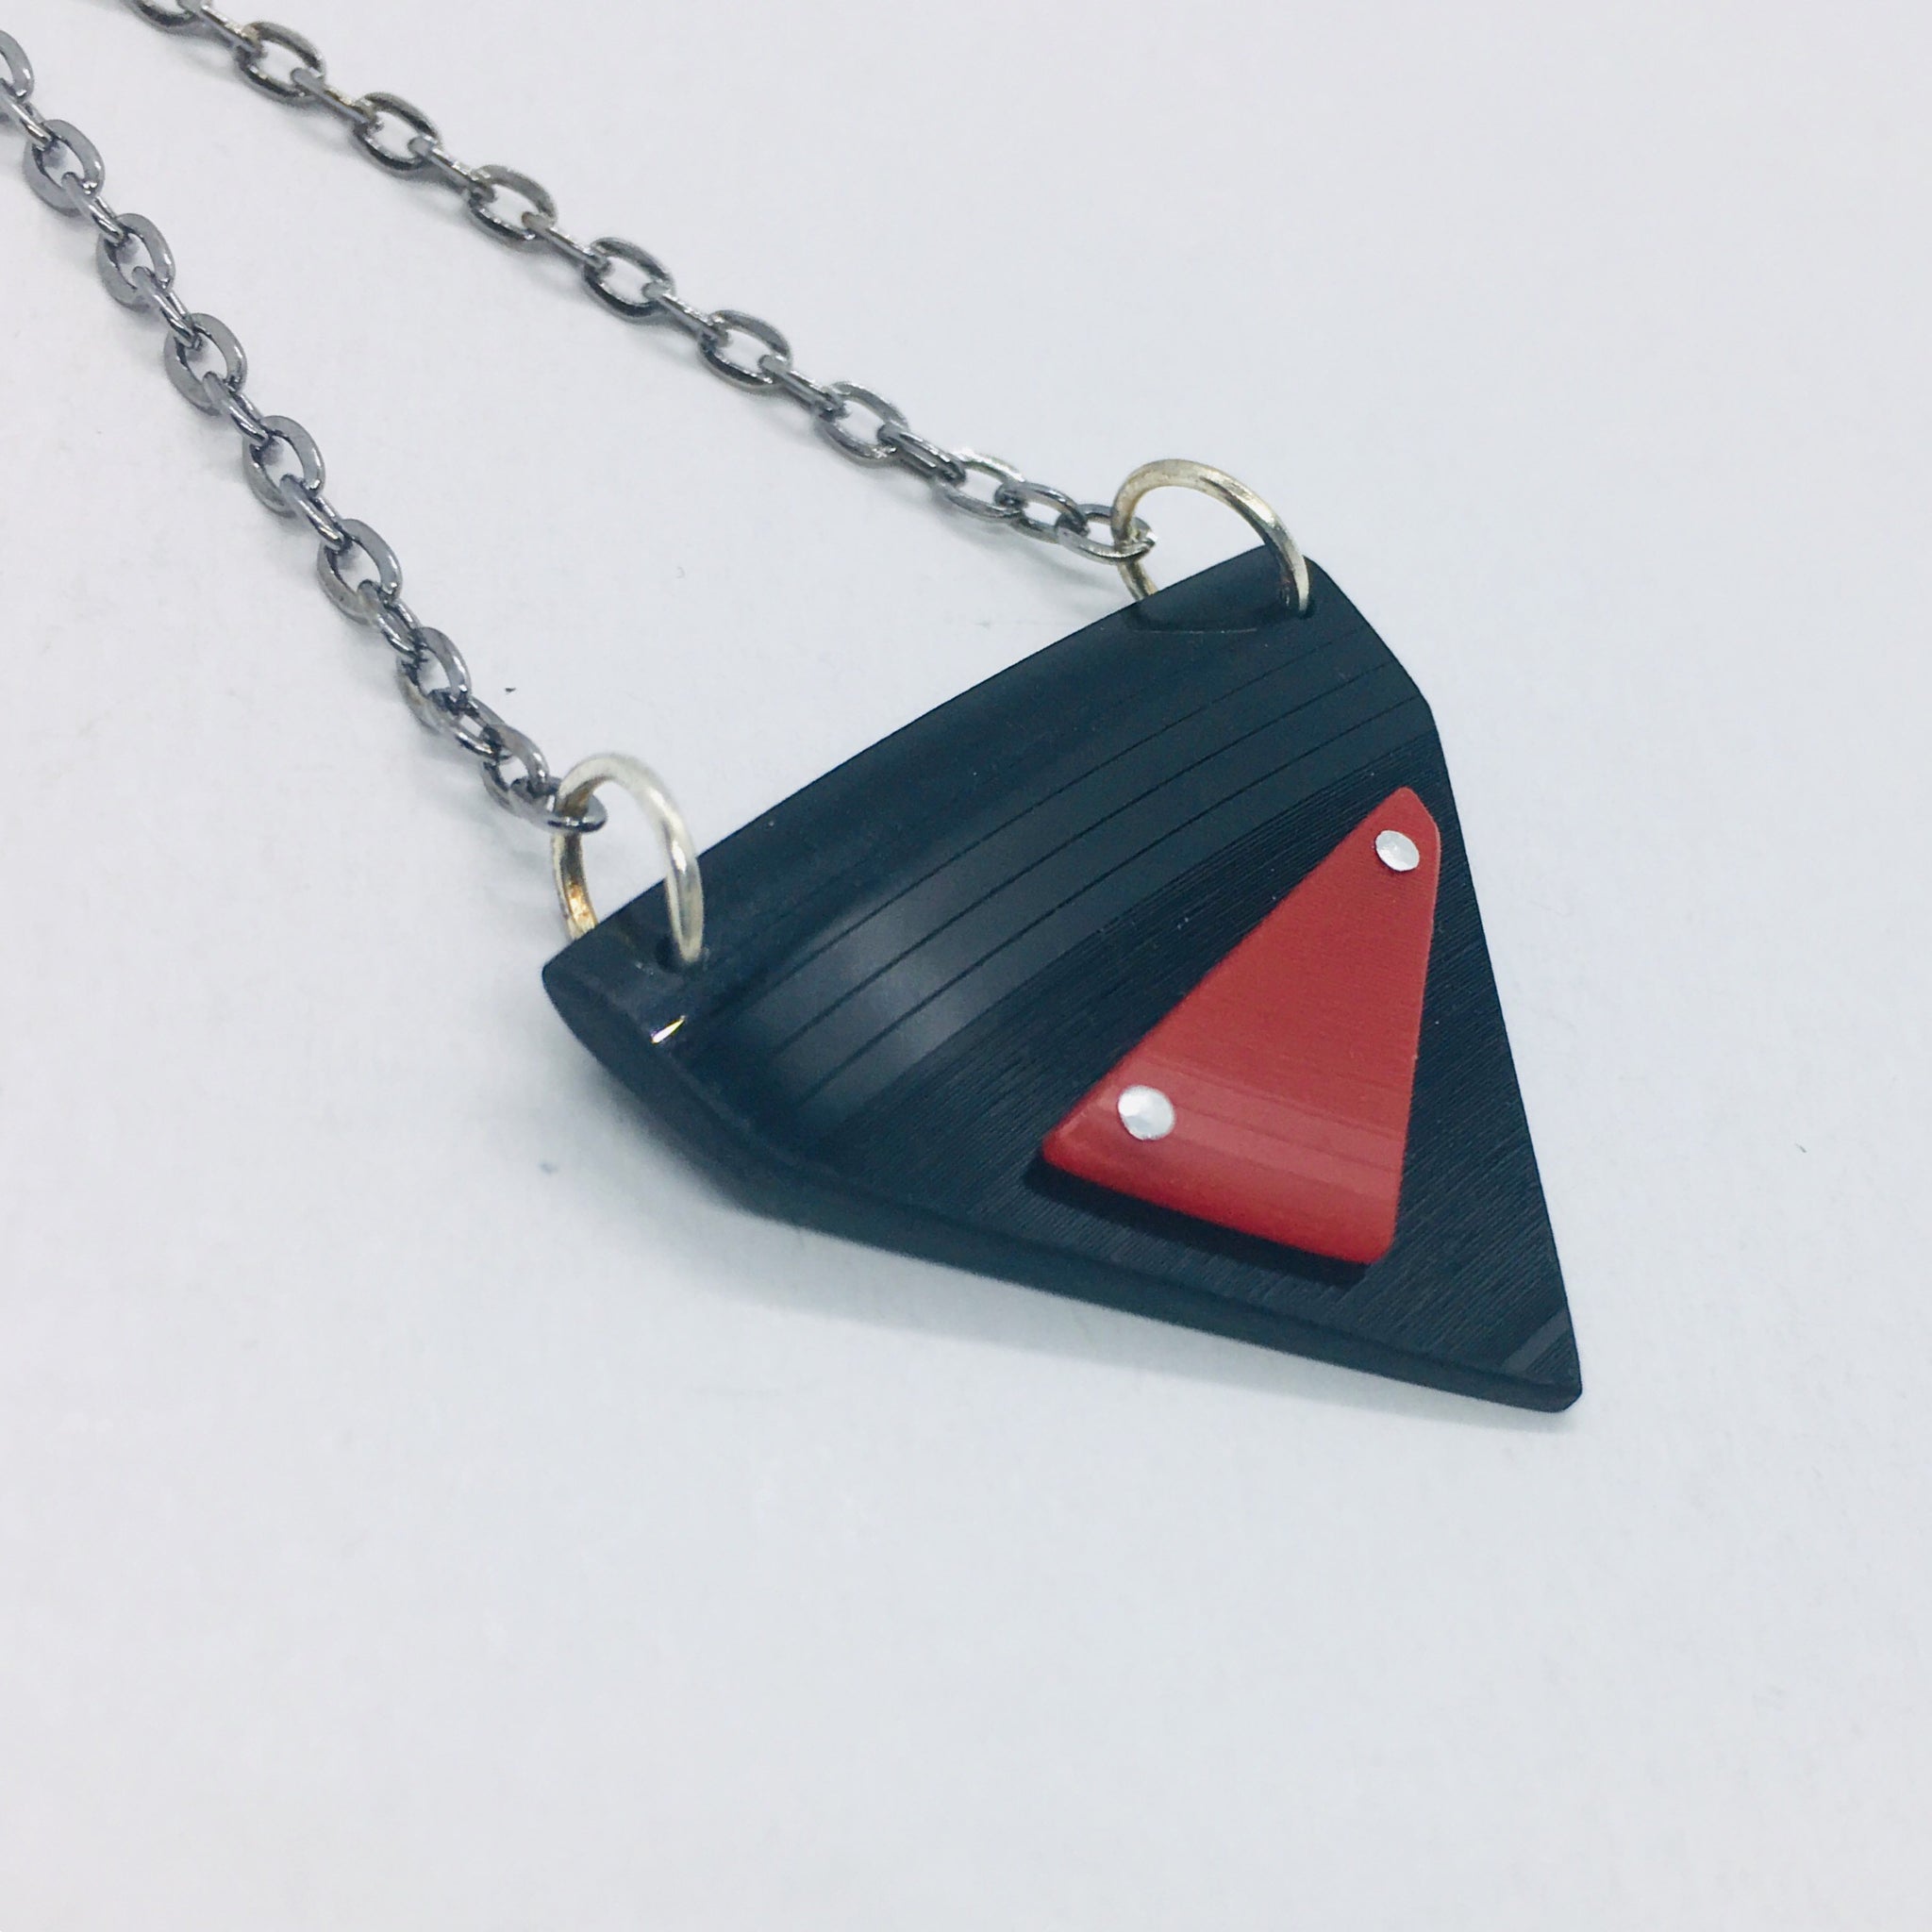 Black and red riveted small necklace